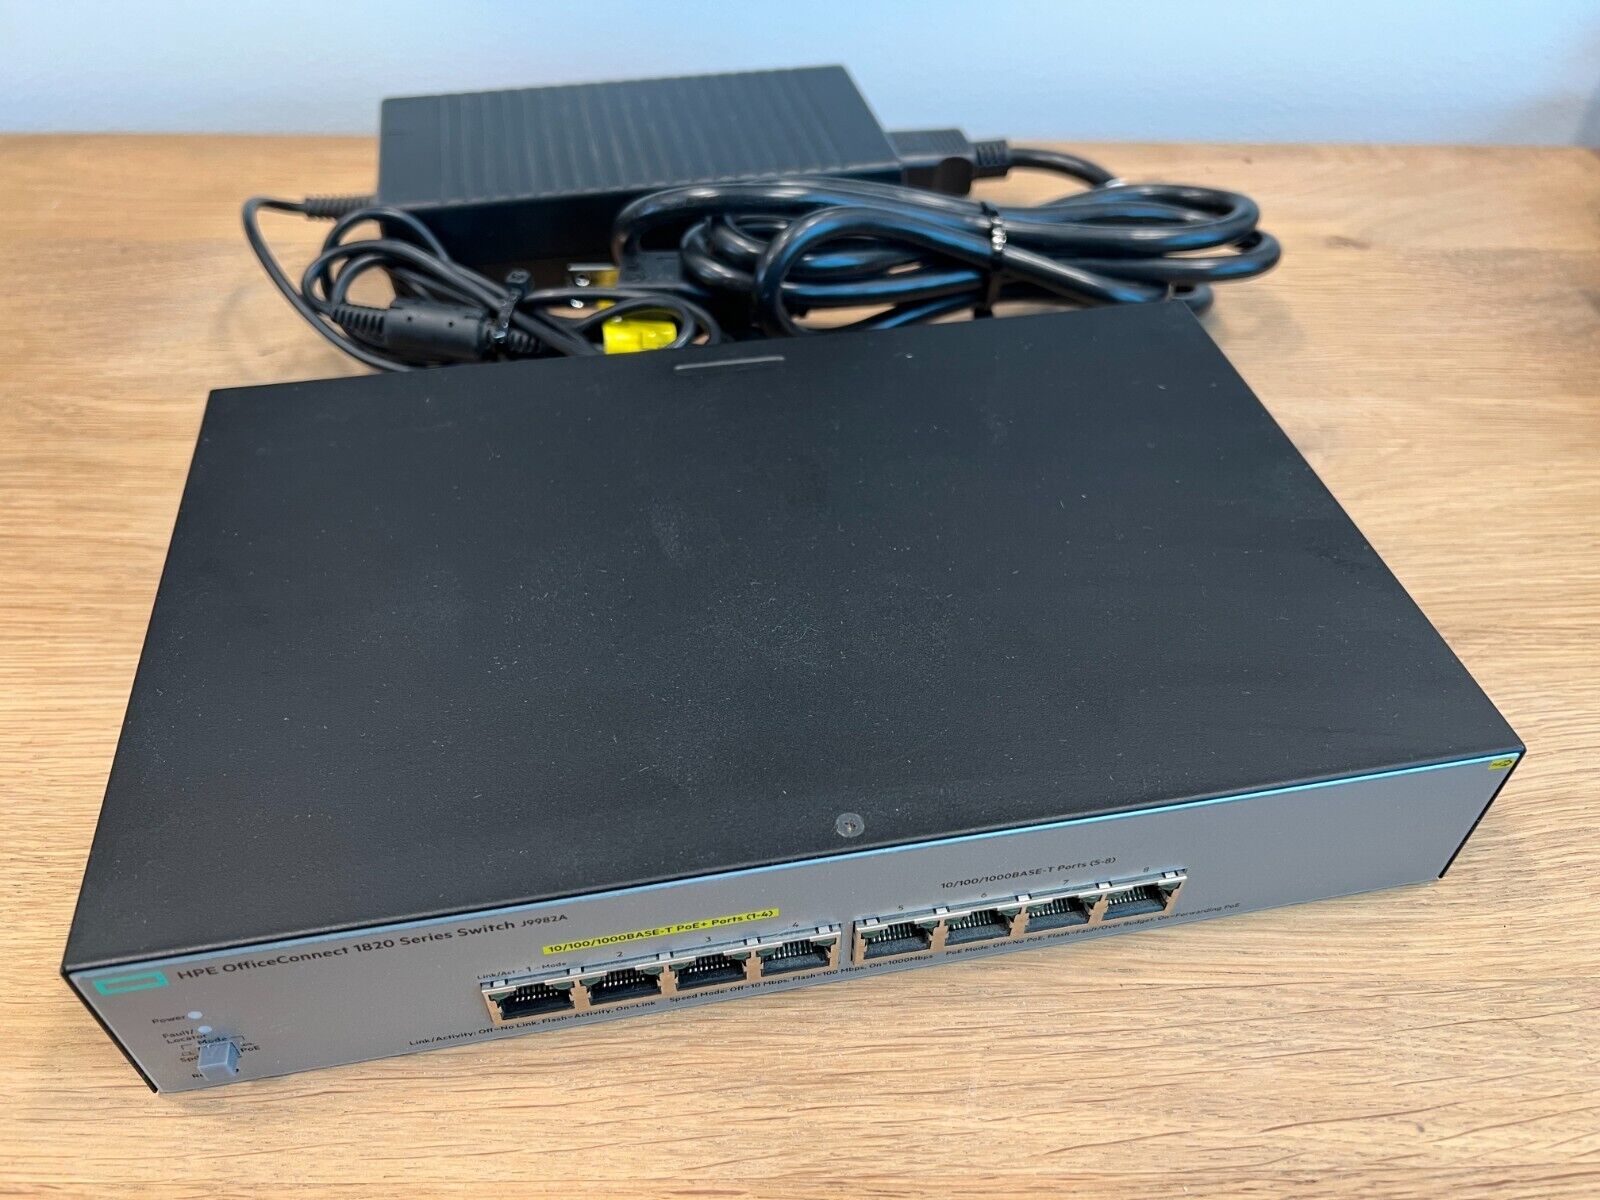 HP HPE OFFICECONNECT 1820 SERIES SWITCH J9982A 8 Ports, 4 PoE Ports